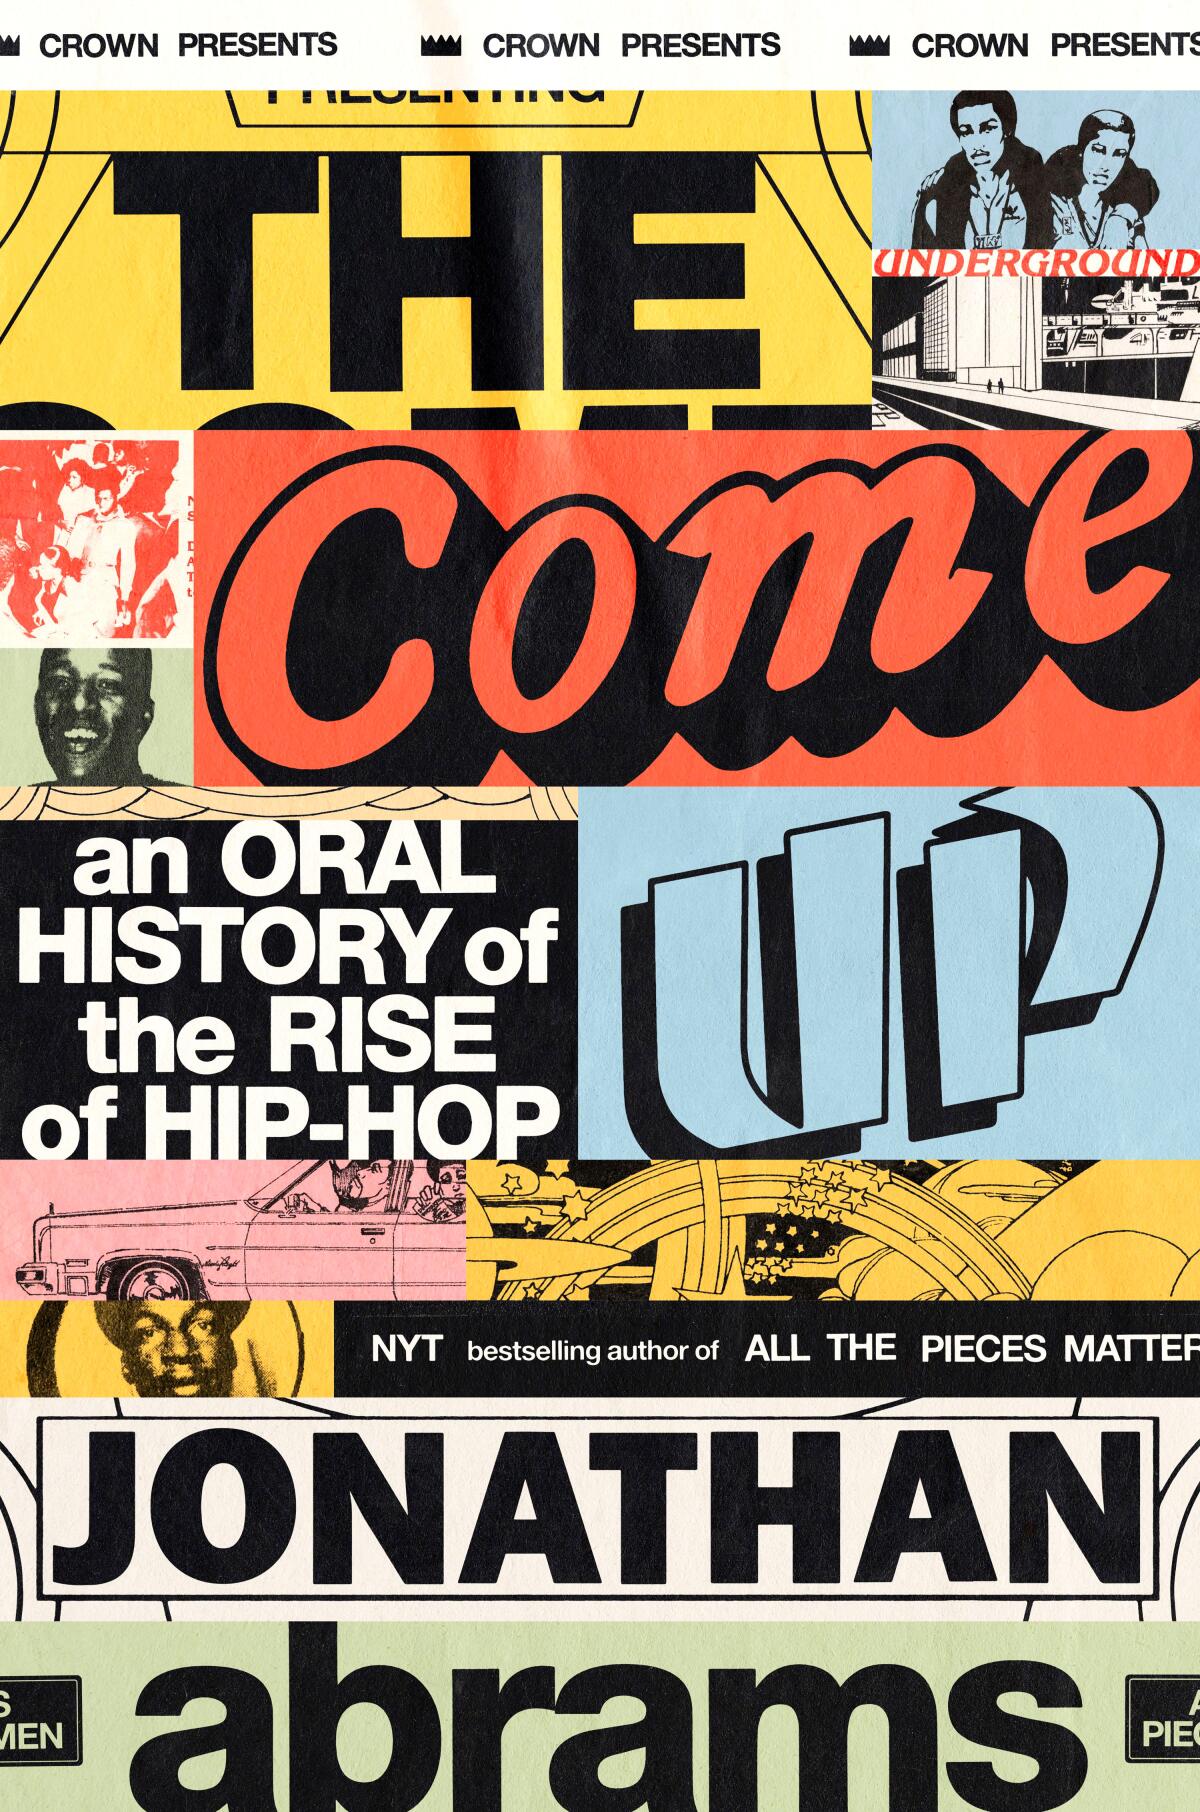 Book cover in comic book style for "The Come Up: An Oral History of the Rise of Hip-Hop" by Jonathan Abrams